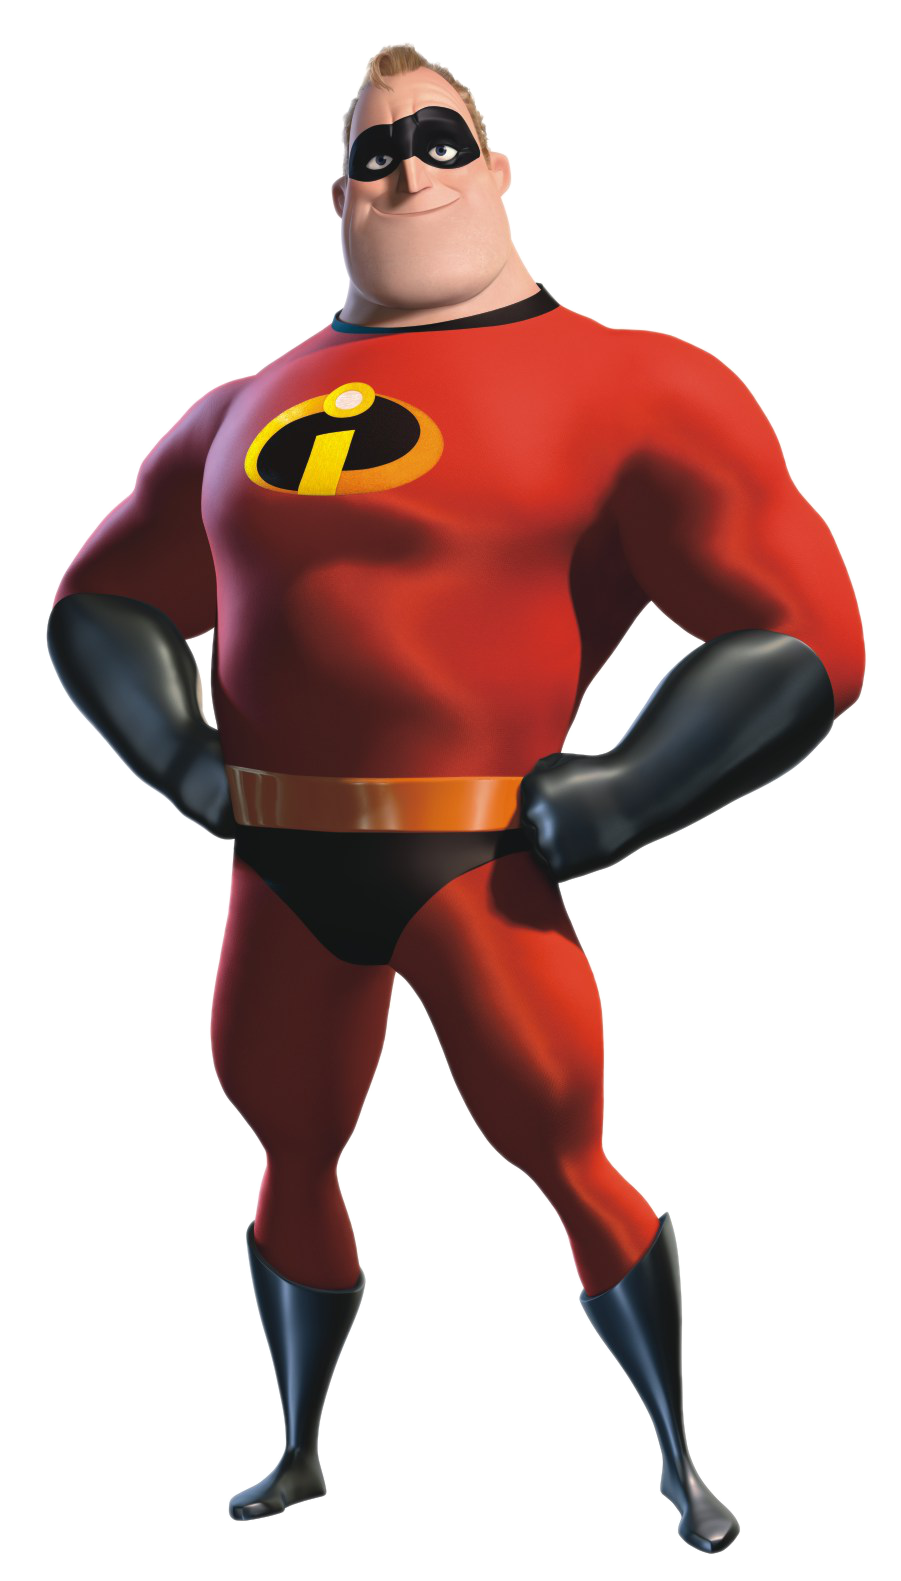 Free Disneyu0027s The Incredibles Clipart and Disney Animated Gifs - Disney  Graphic Characters Brought to You by Triplets And Us